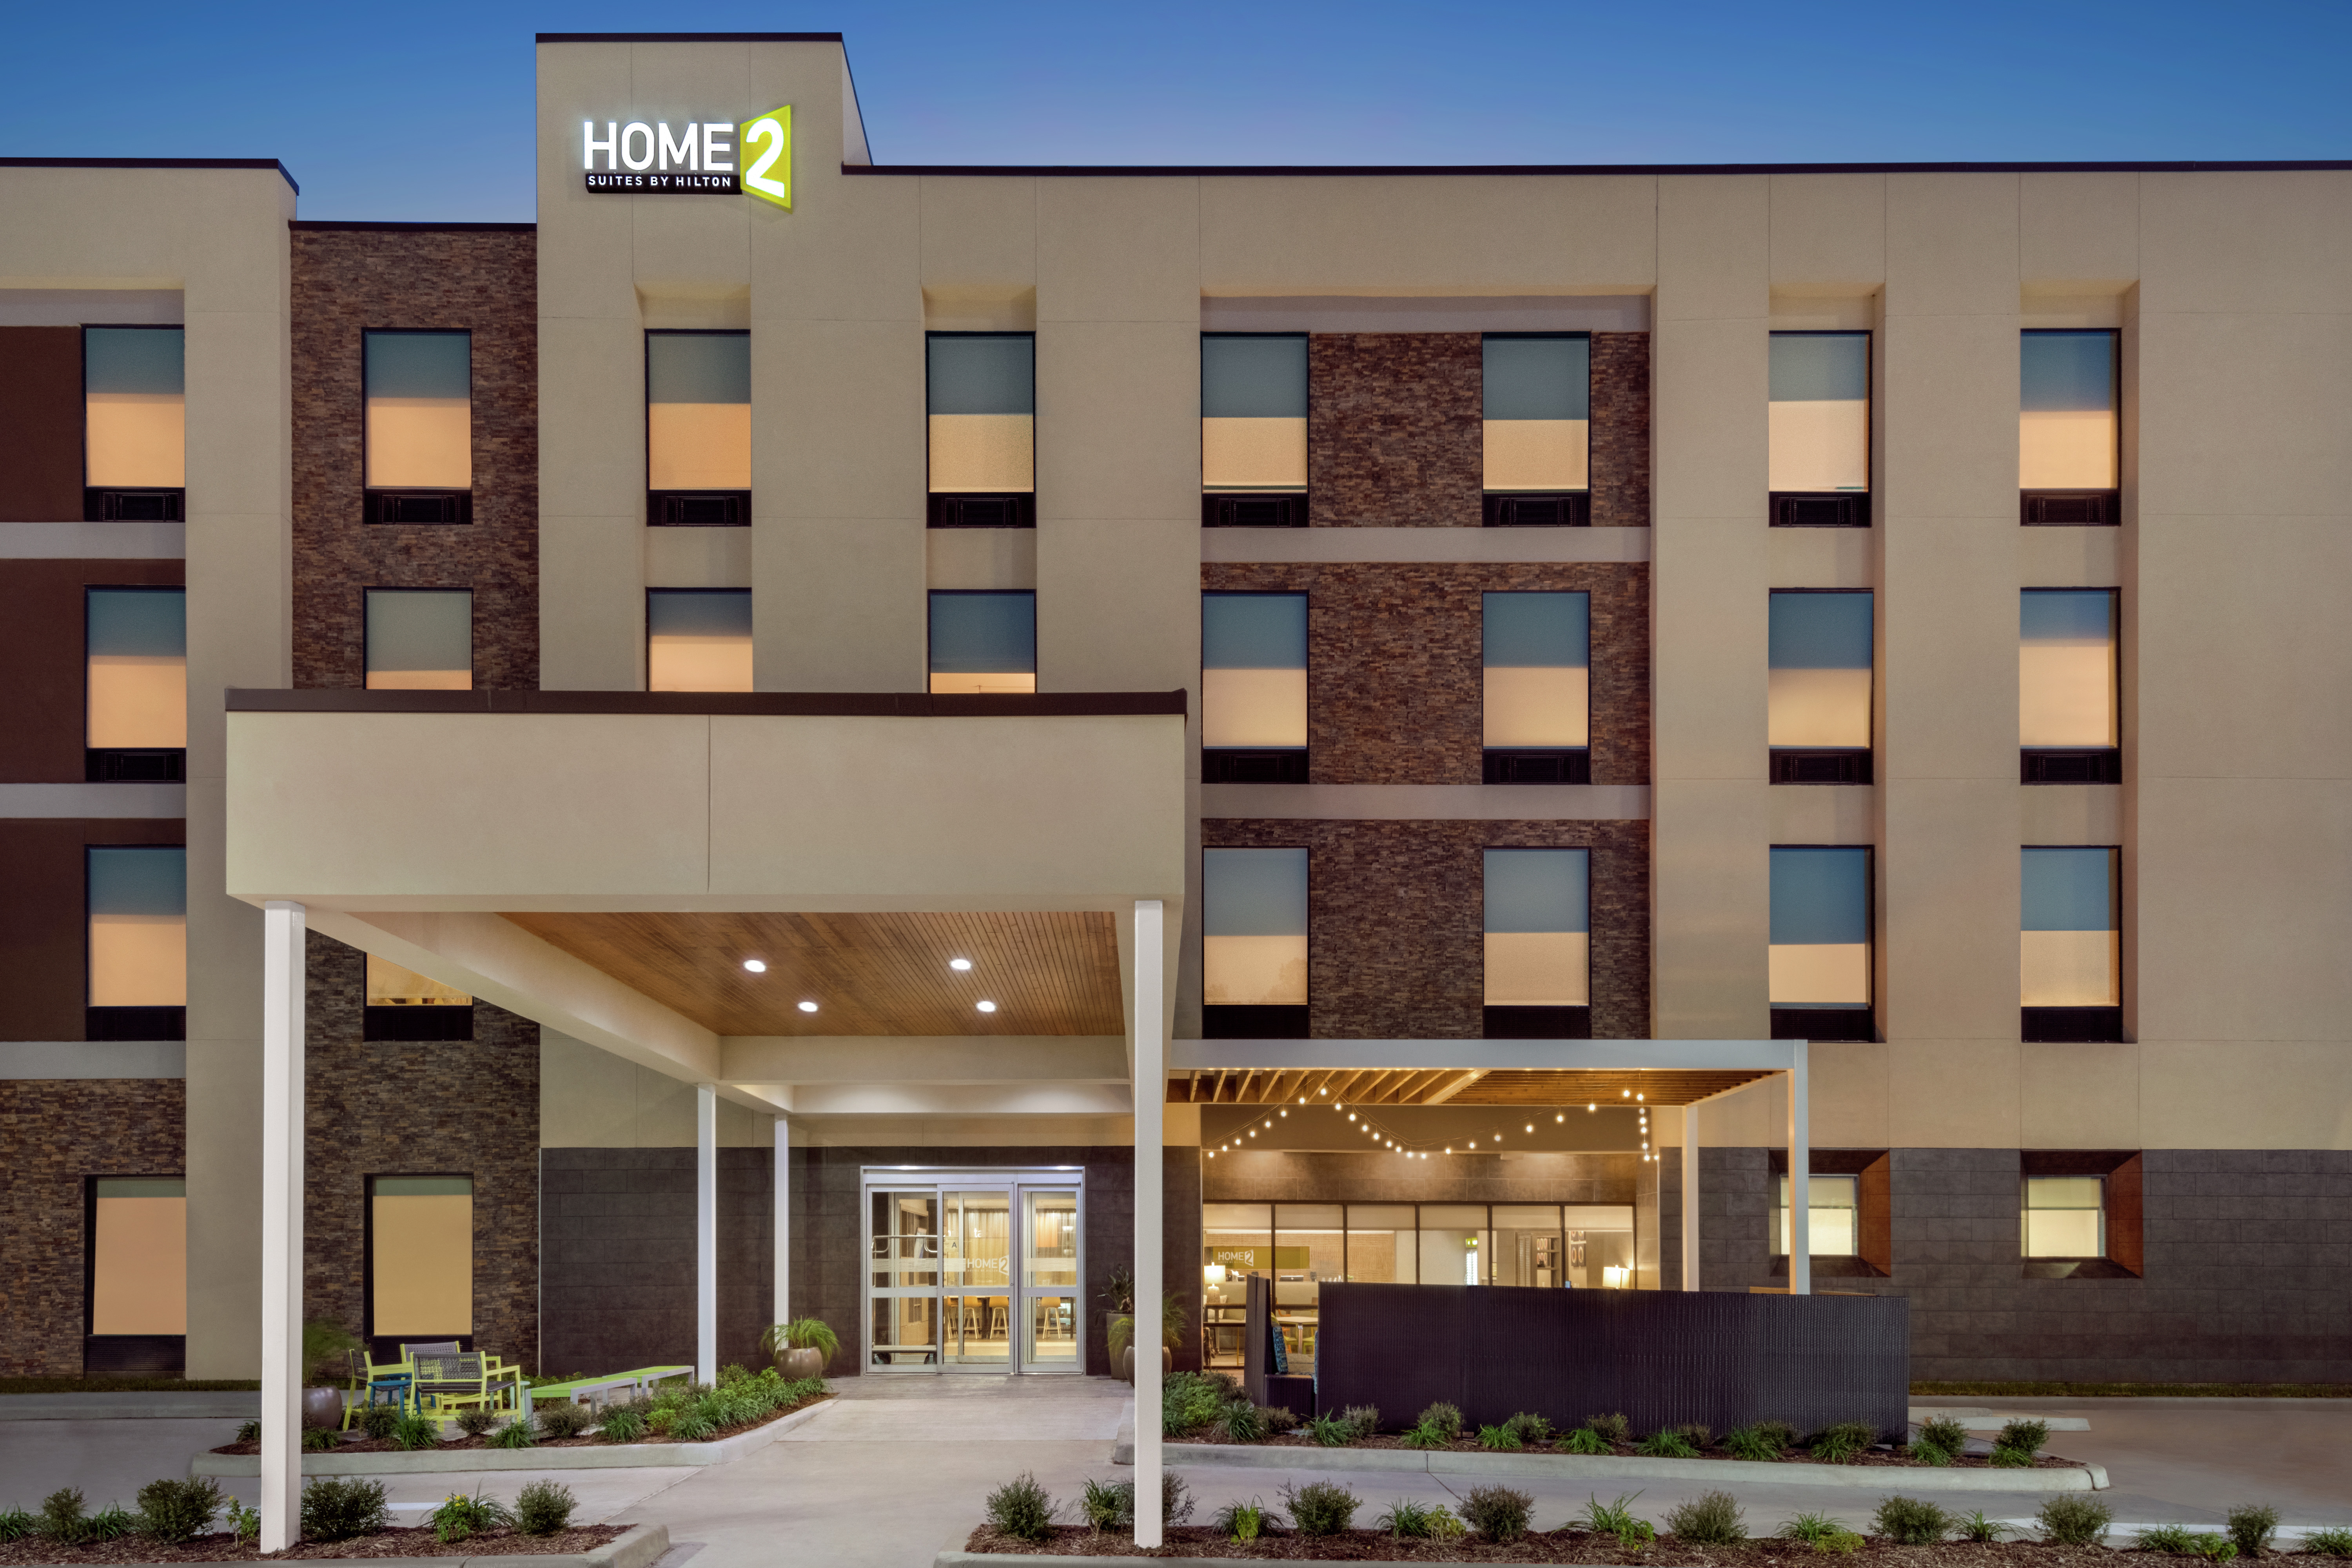 Modern Home2 Suites hotel exterior with porte cochere, patio for guests to relax, and glowing lobby.